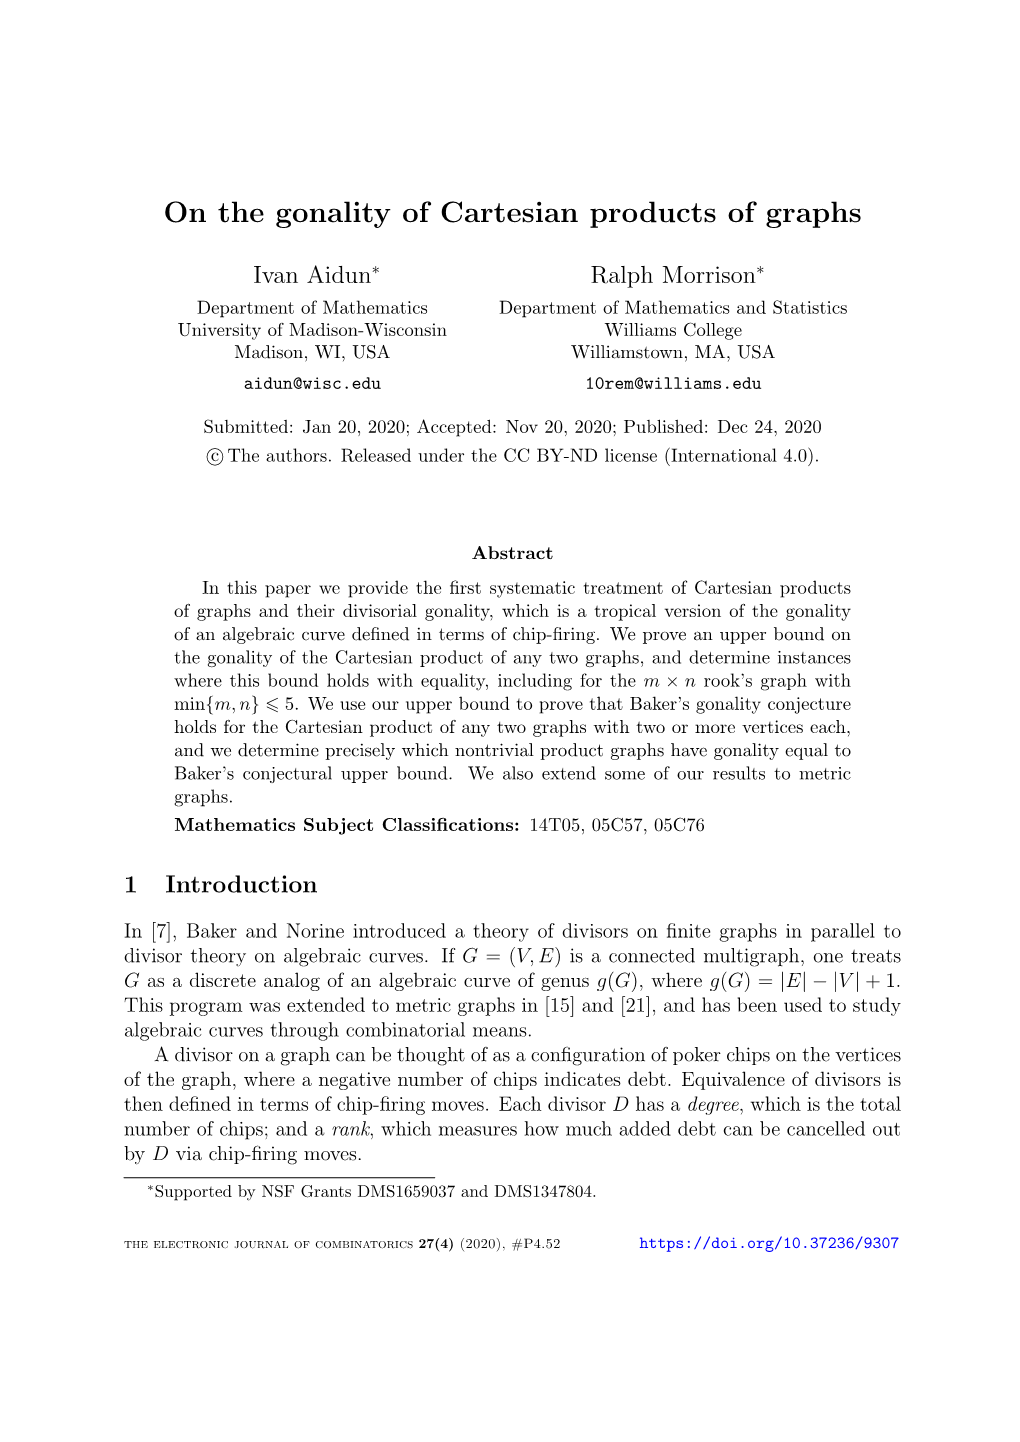 On the Gonality of Cartesian Products of Graphs